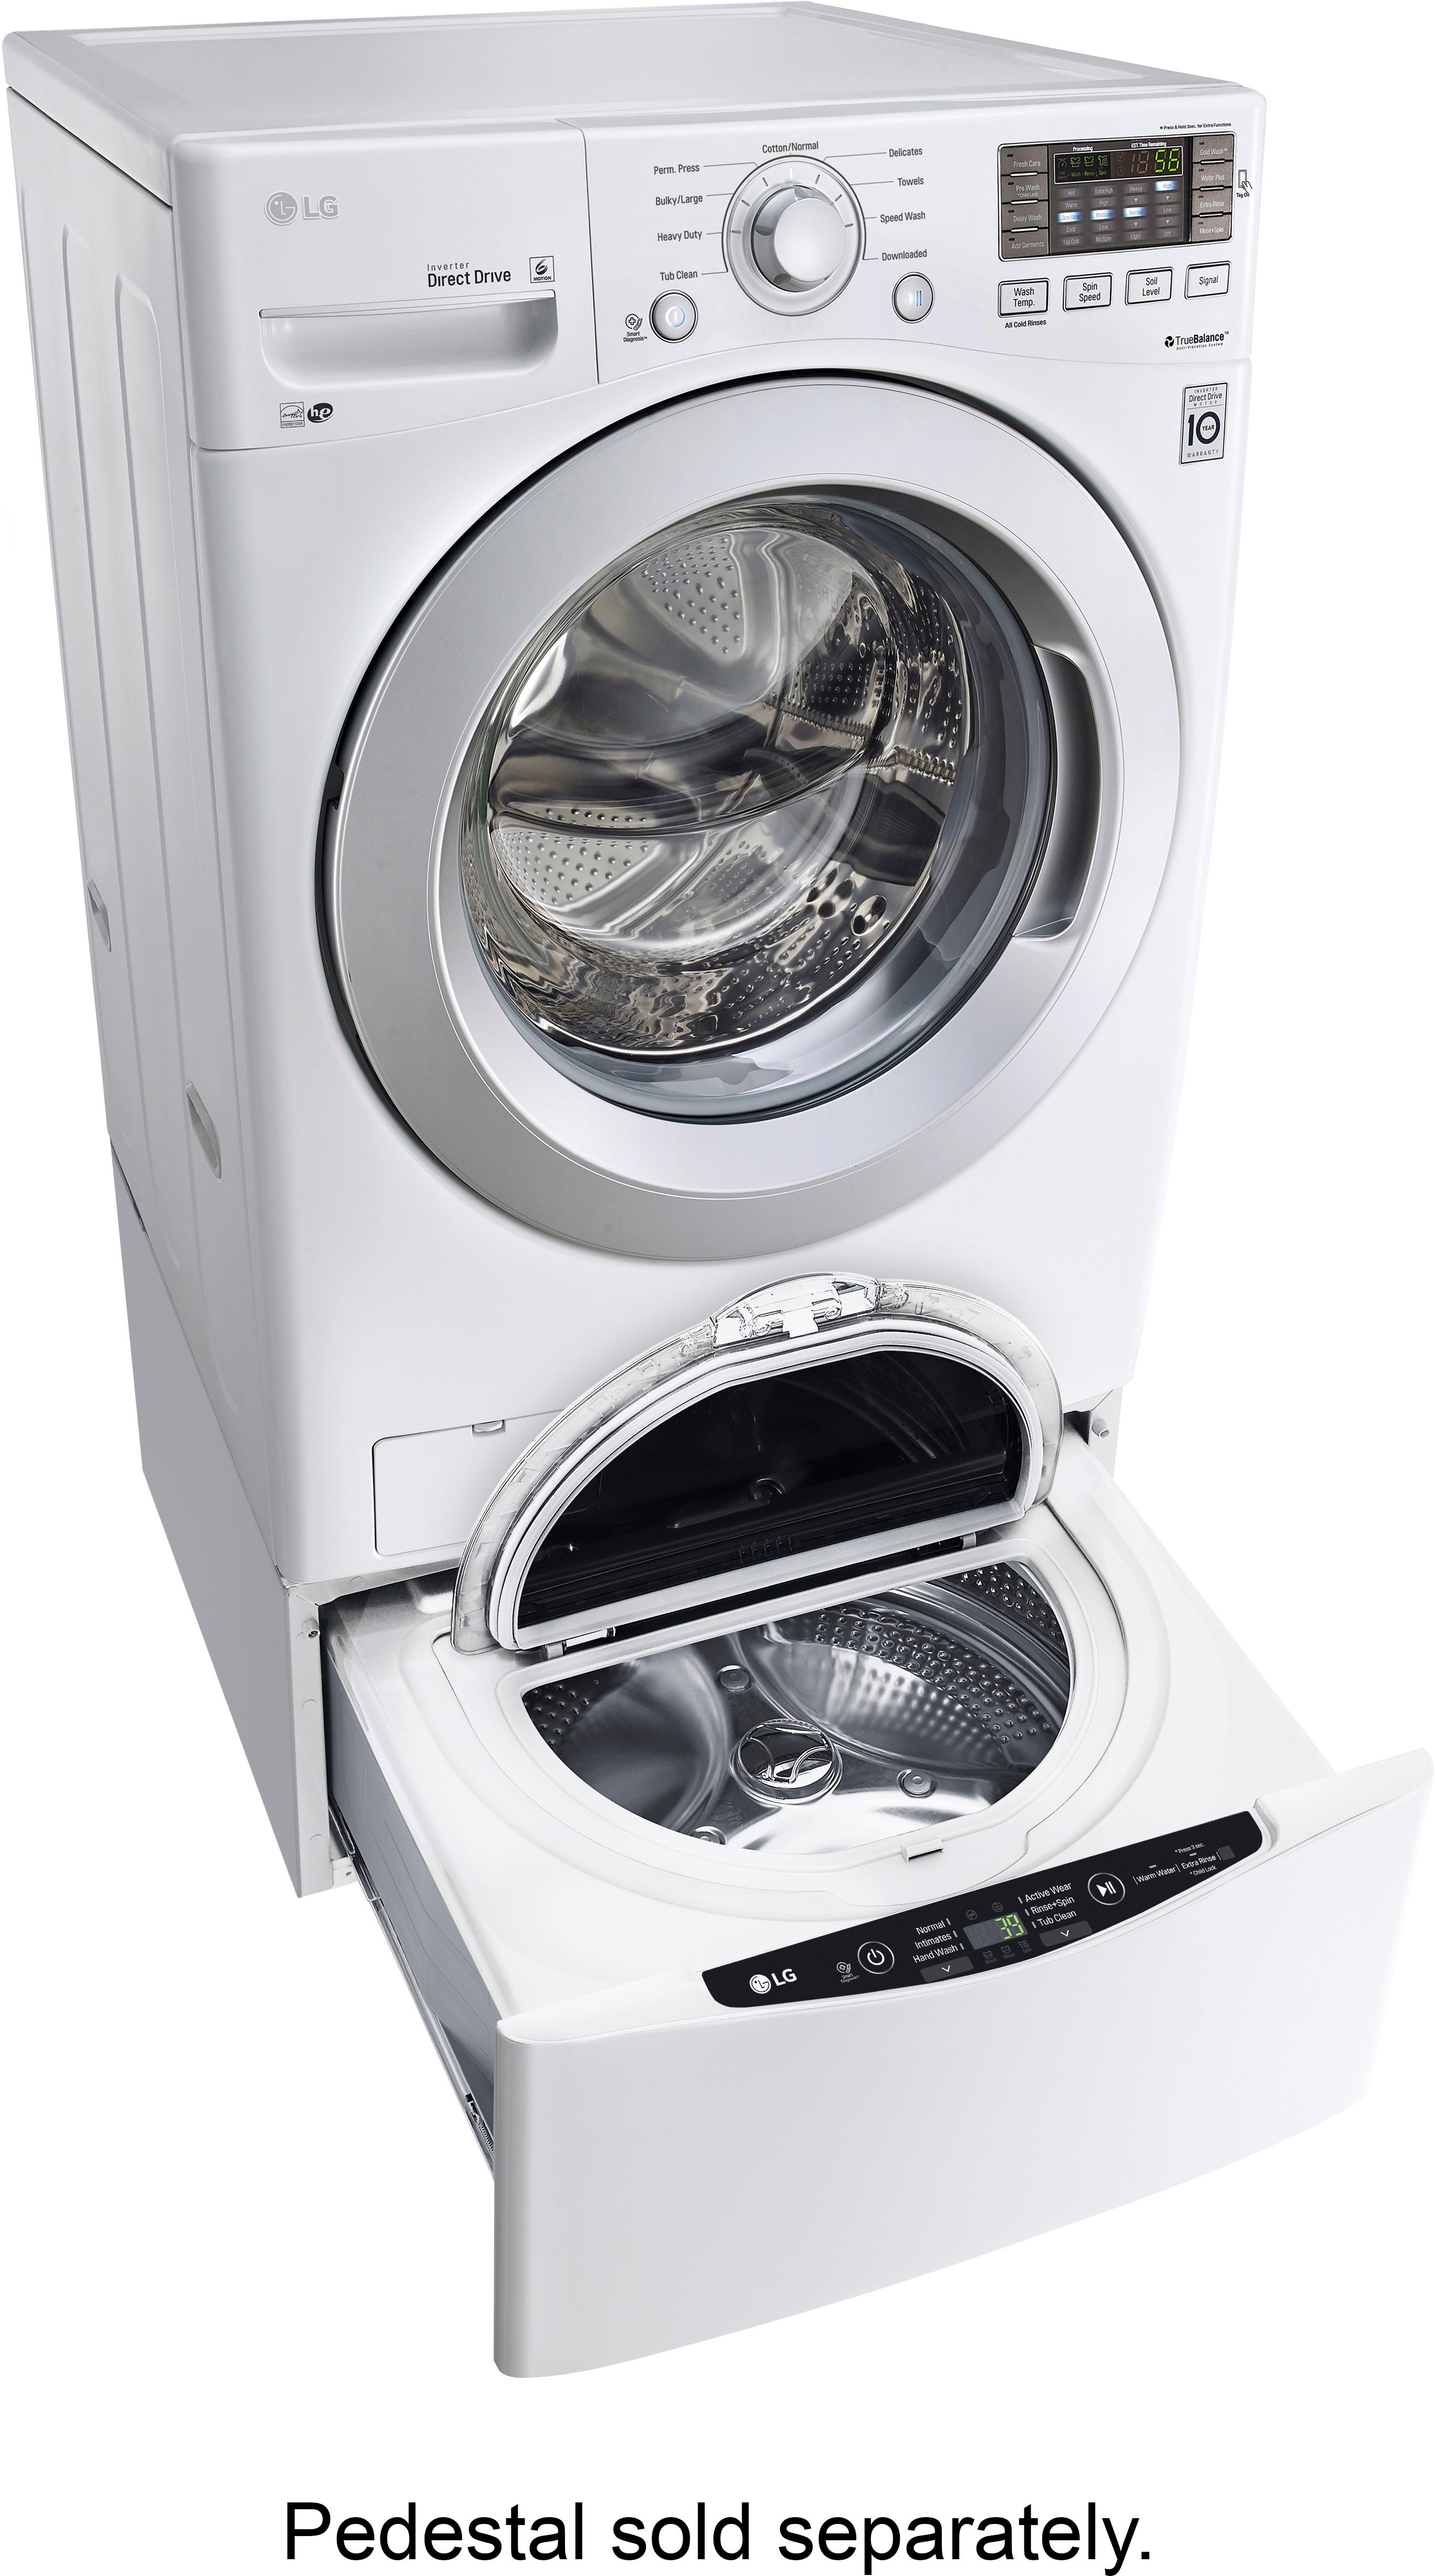 WM3270CW  LG 27 4.5 cu. ft. Front Load Washer - White